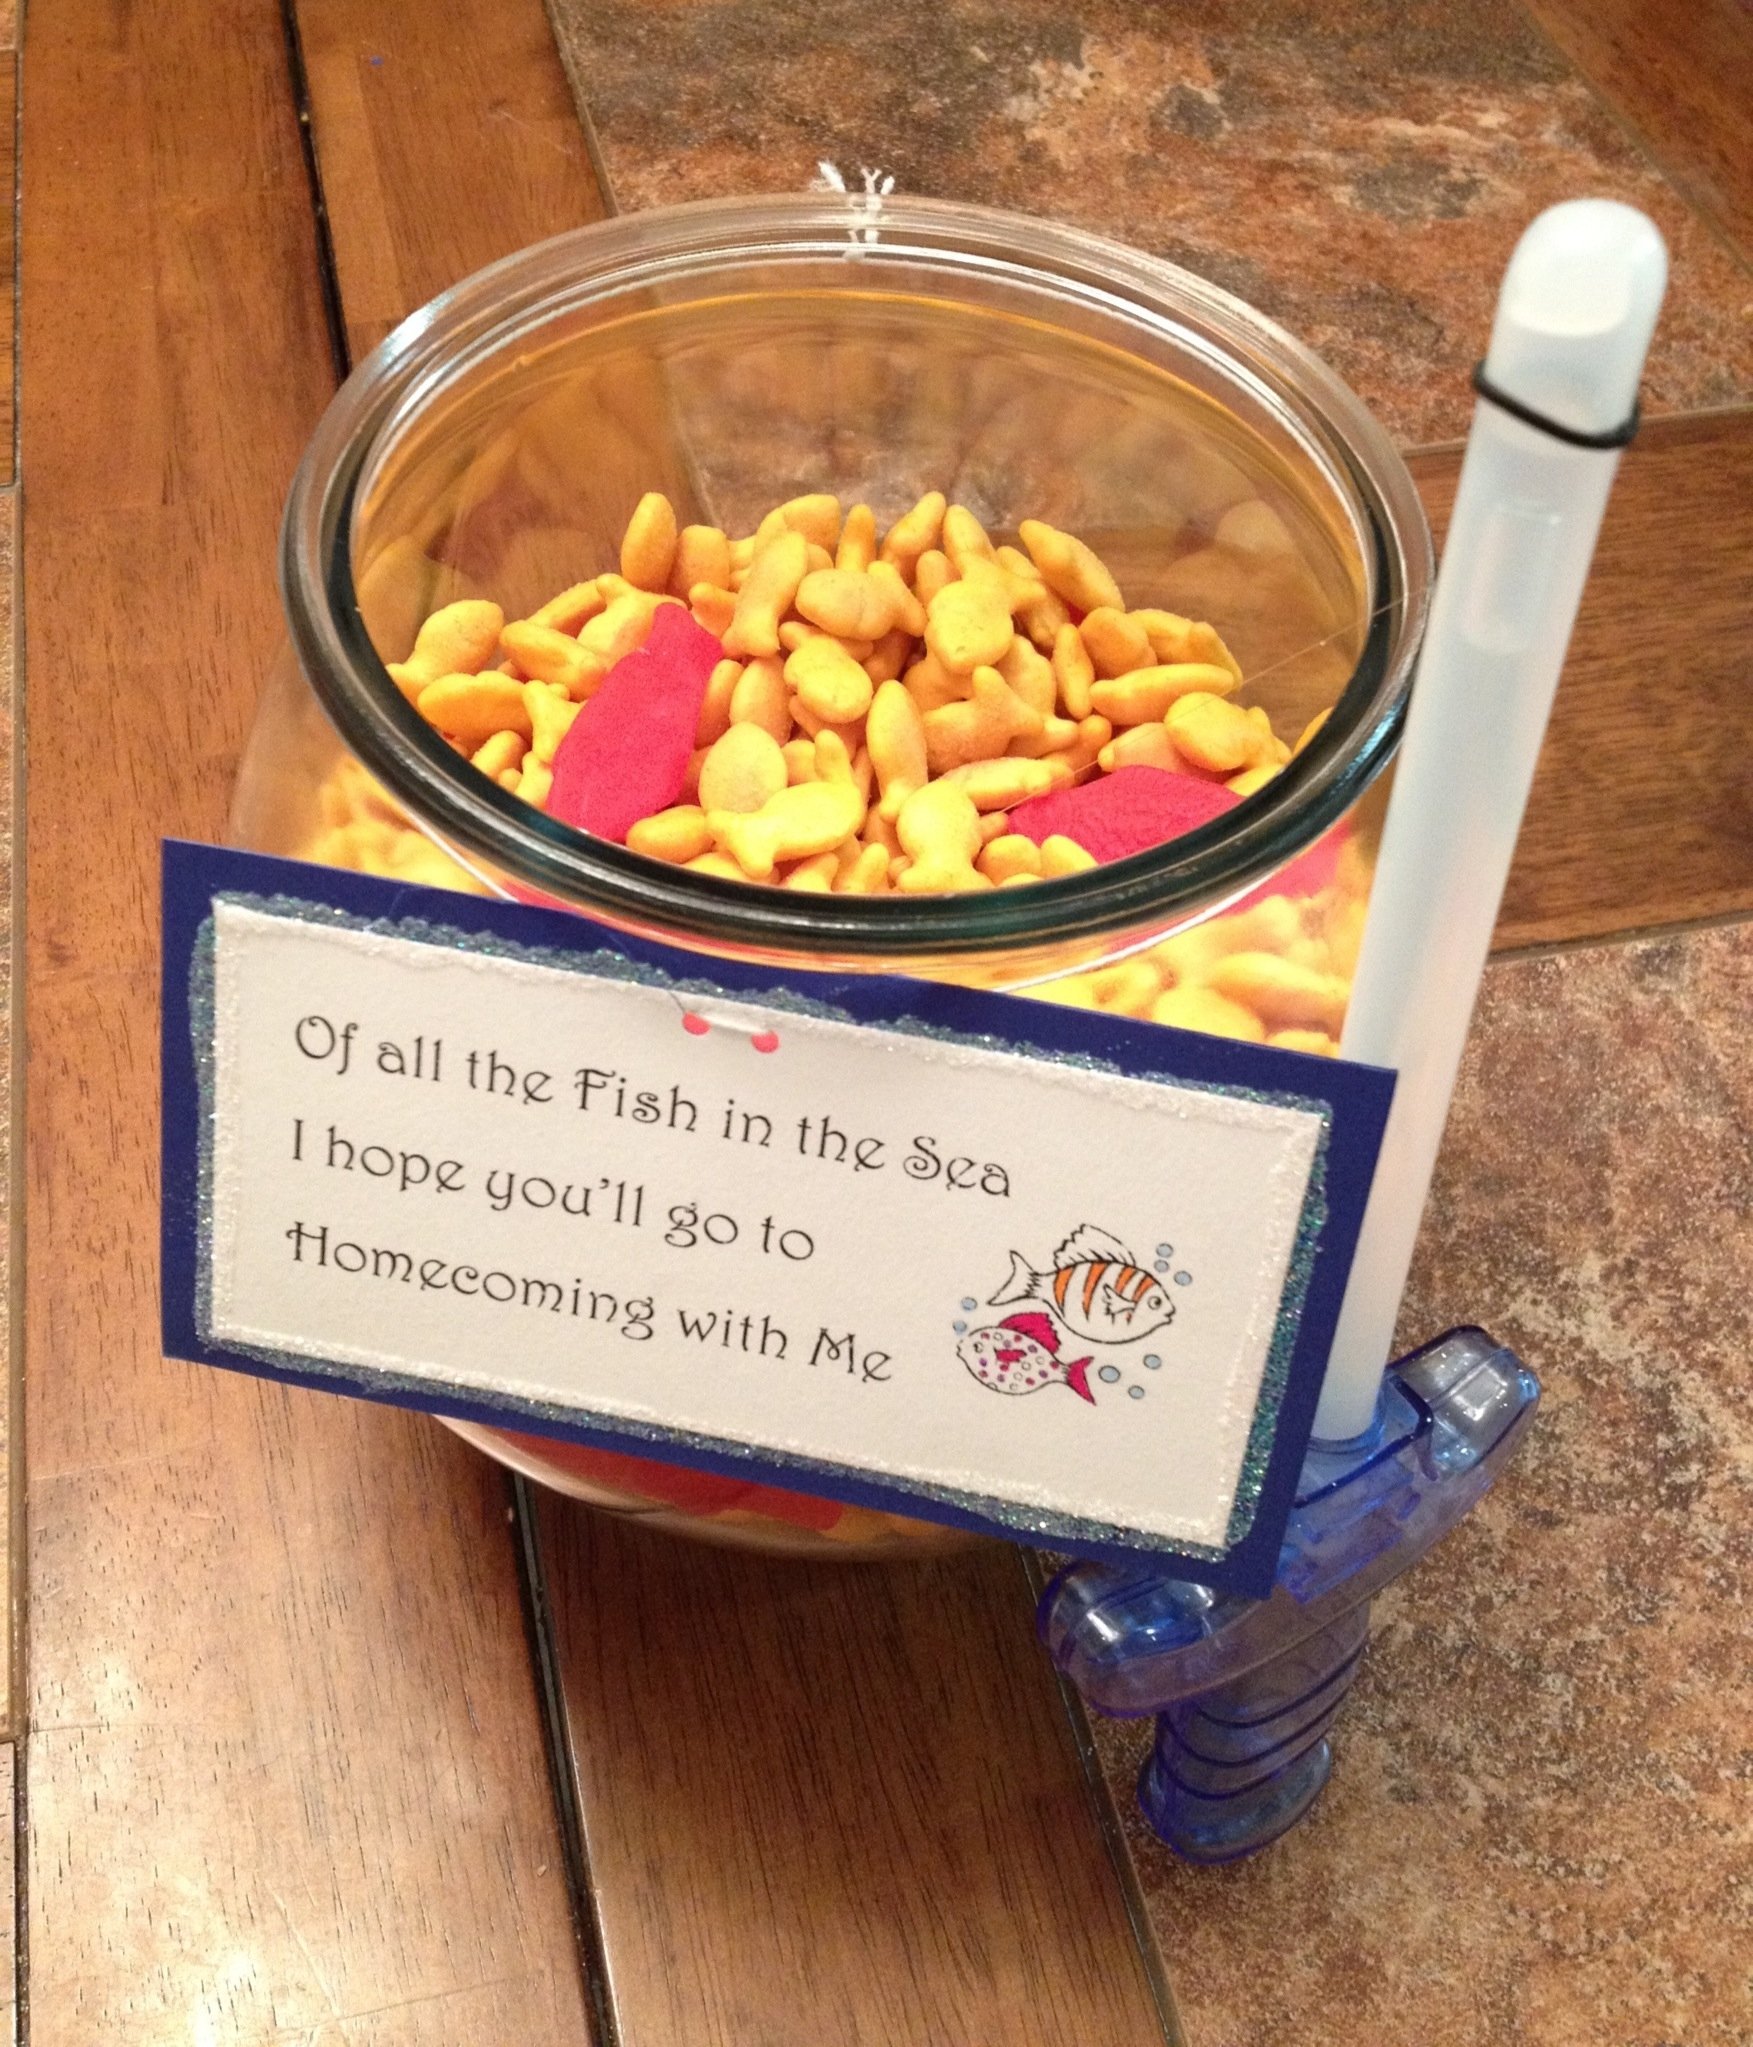 10 Unique Cute Prom Ideas To Ask A Girl another idea for asking a girl to homecoming prom the fishbowl is 16 2022